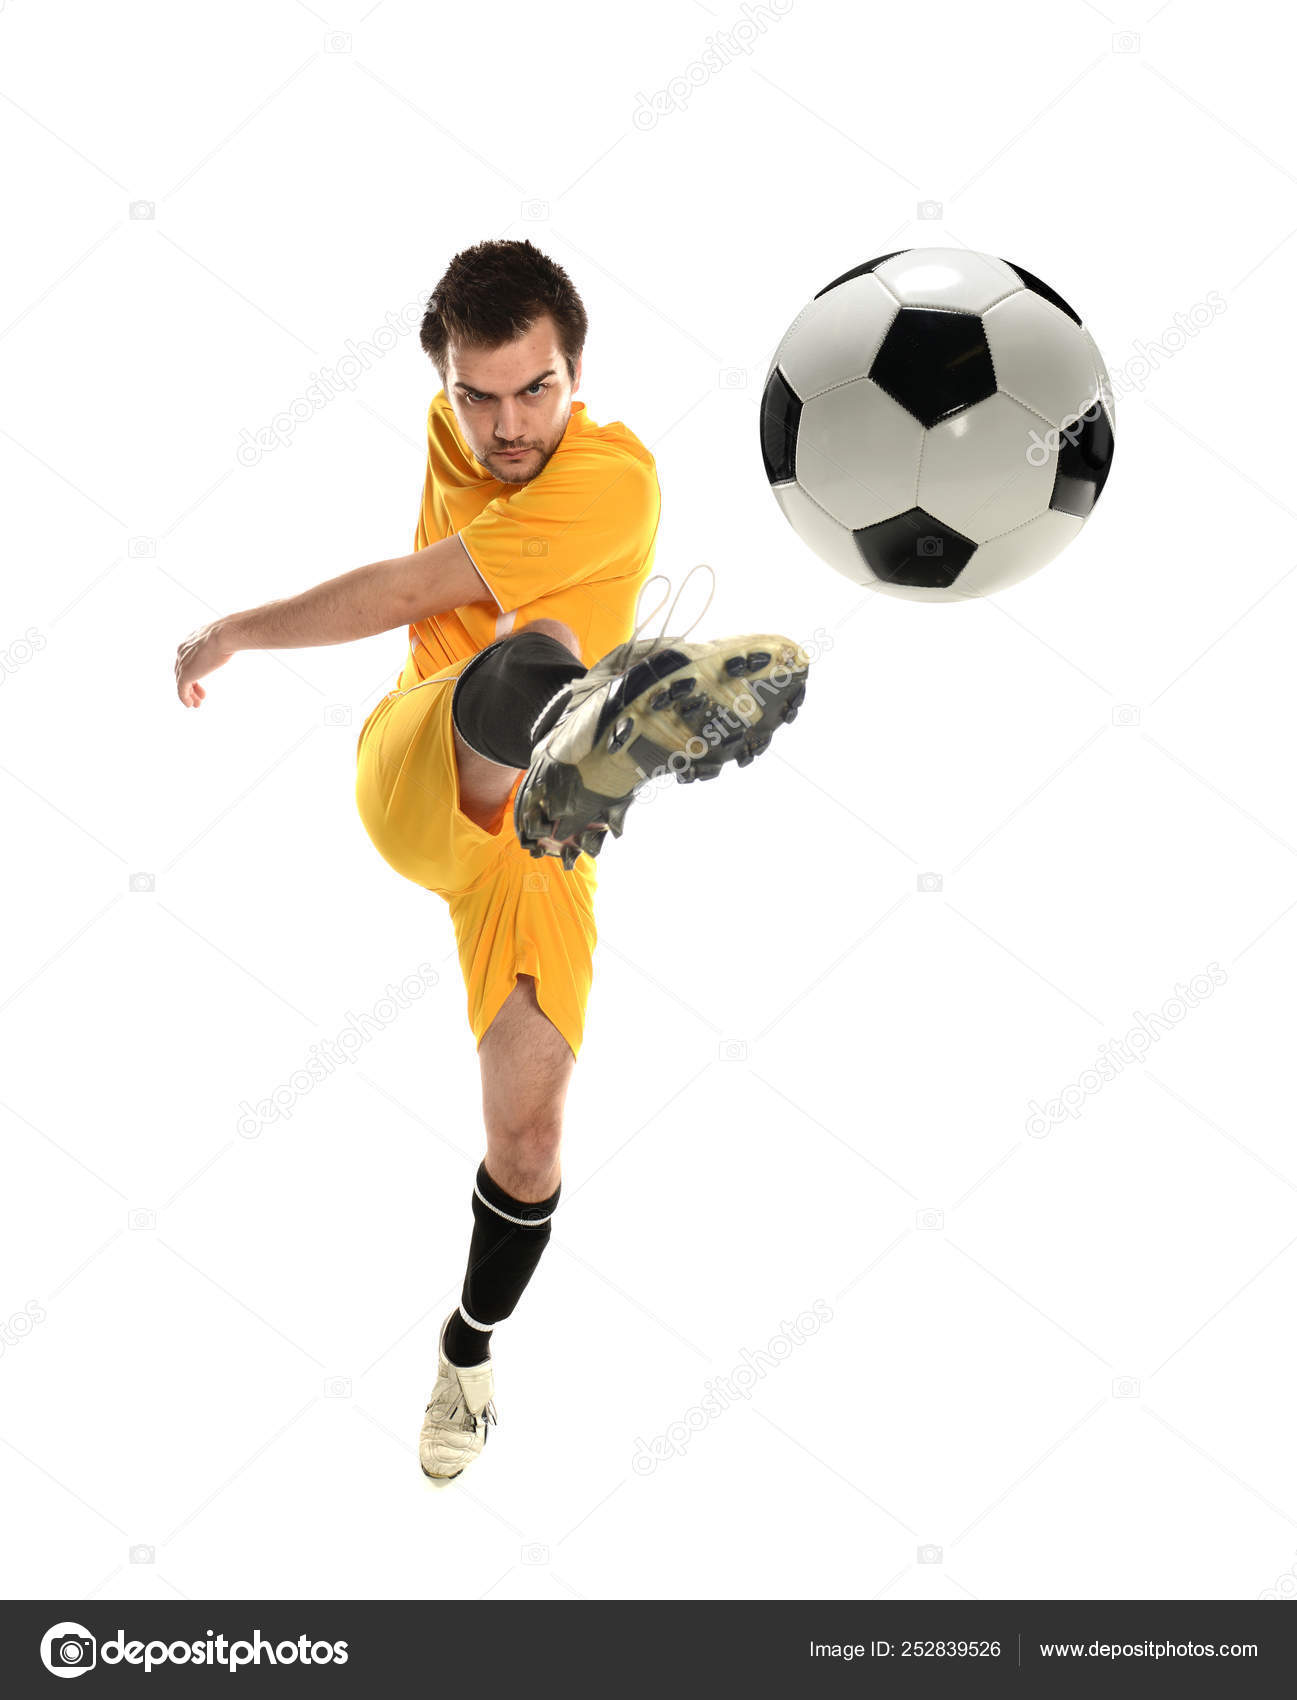 There was a soccer player who kicked the ball